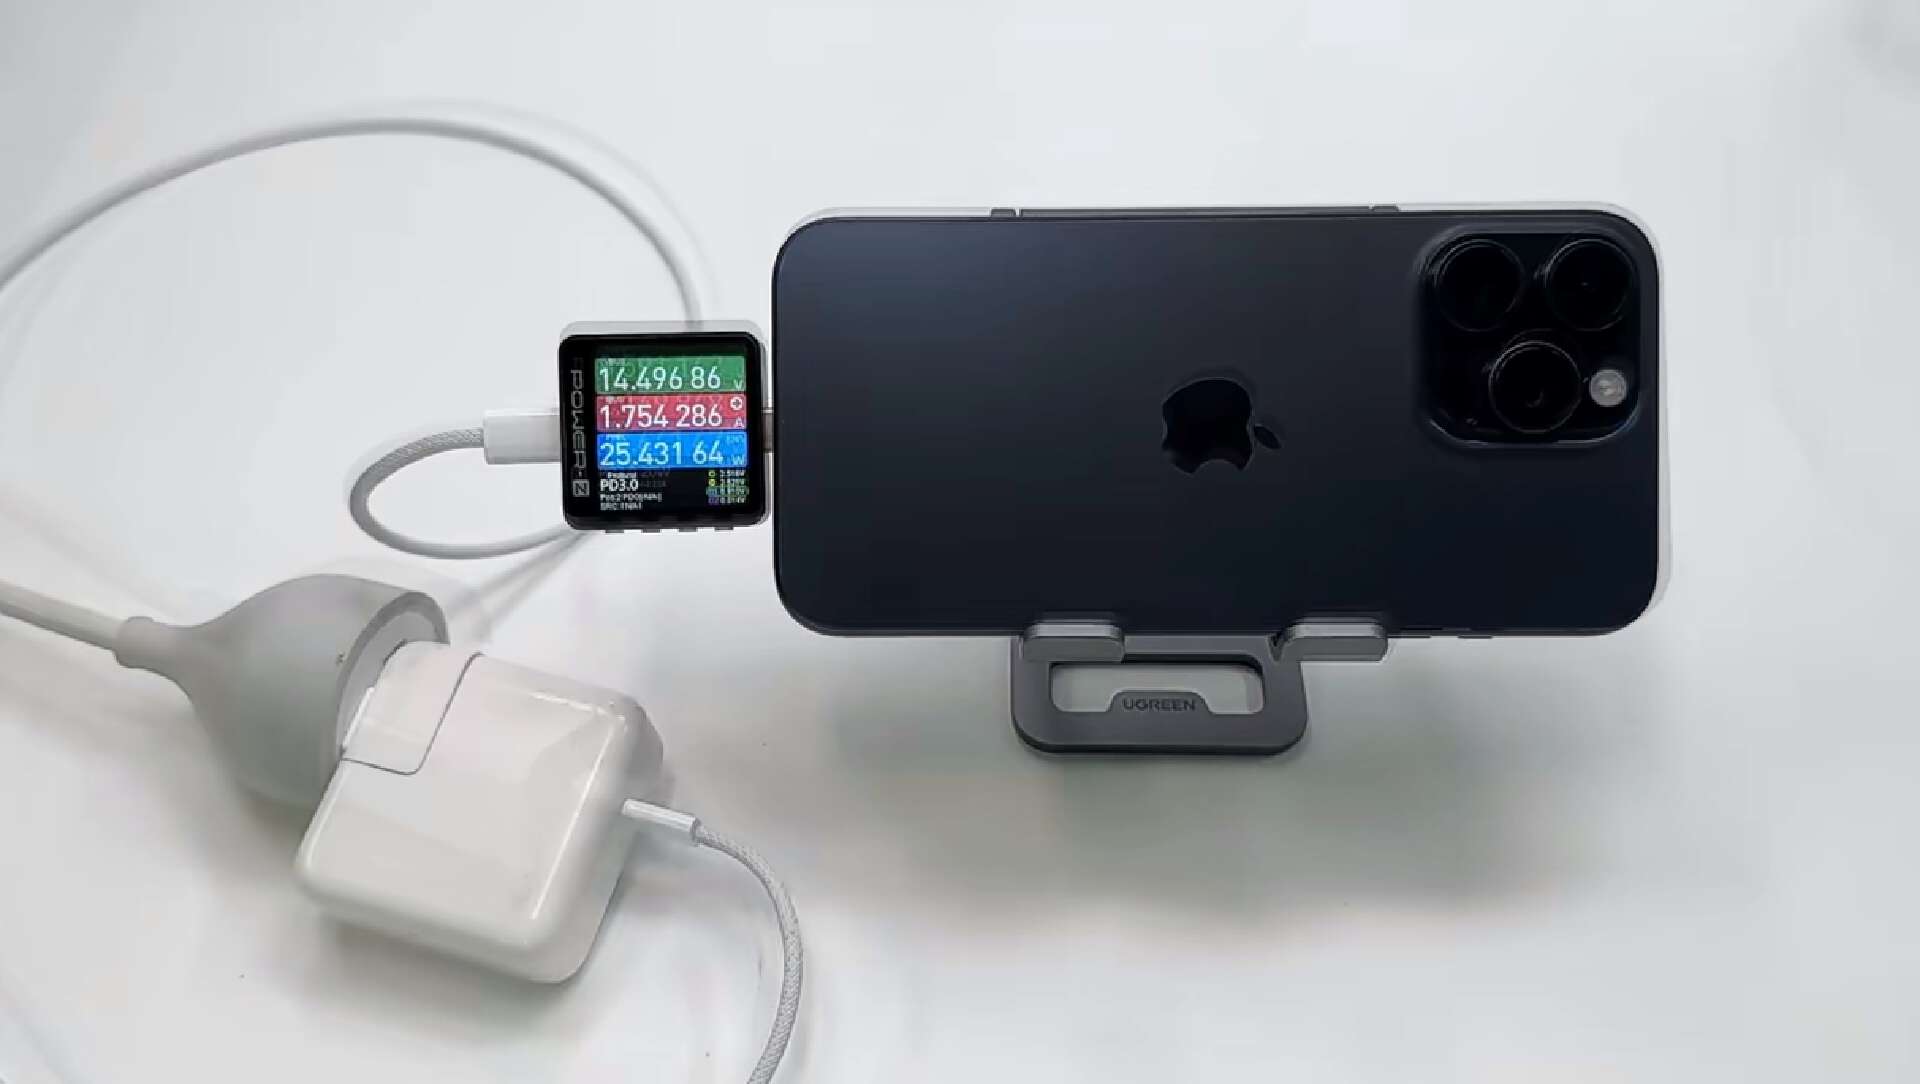 Apple iPhone 15 Pro Max Charging Test - ChargerLAB Compatibility 100 -  Chargerlab